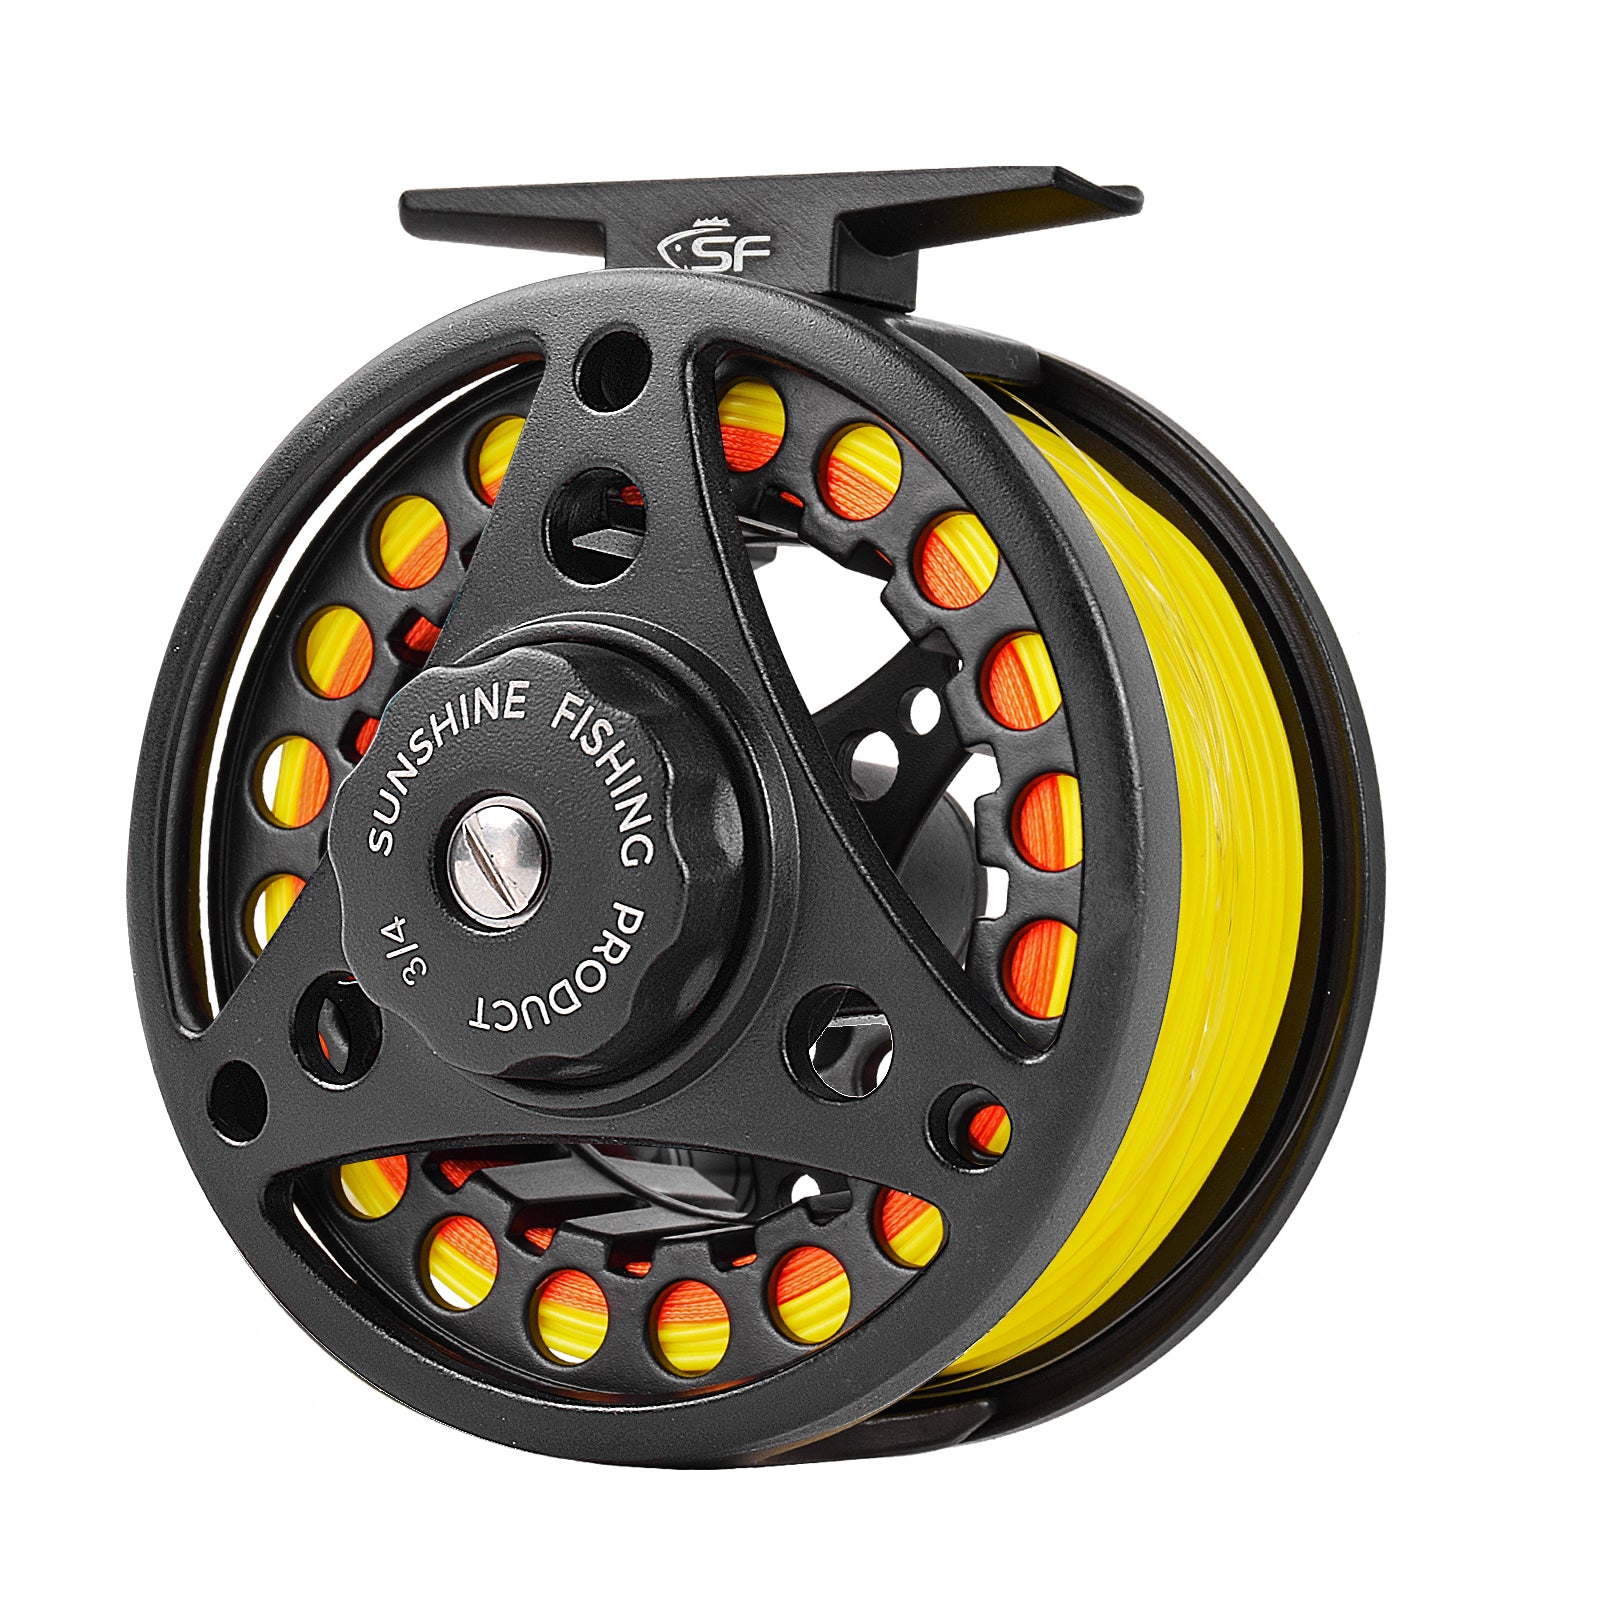 Angler Dream Fly Fishing Reel 3/4 5/6 7/8 WT with Line Combo Die-Casting  Reel Fly Fishing Line Floating Braided Backing Line